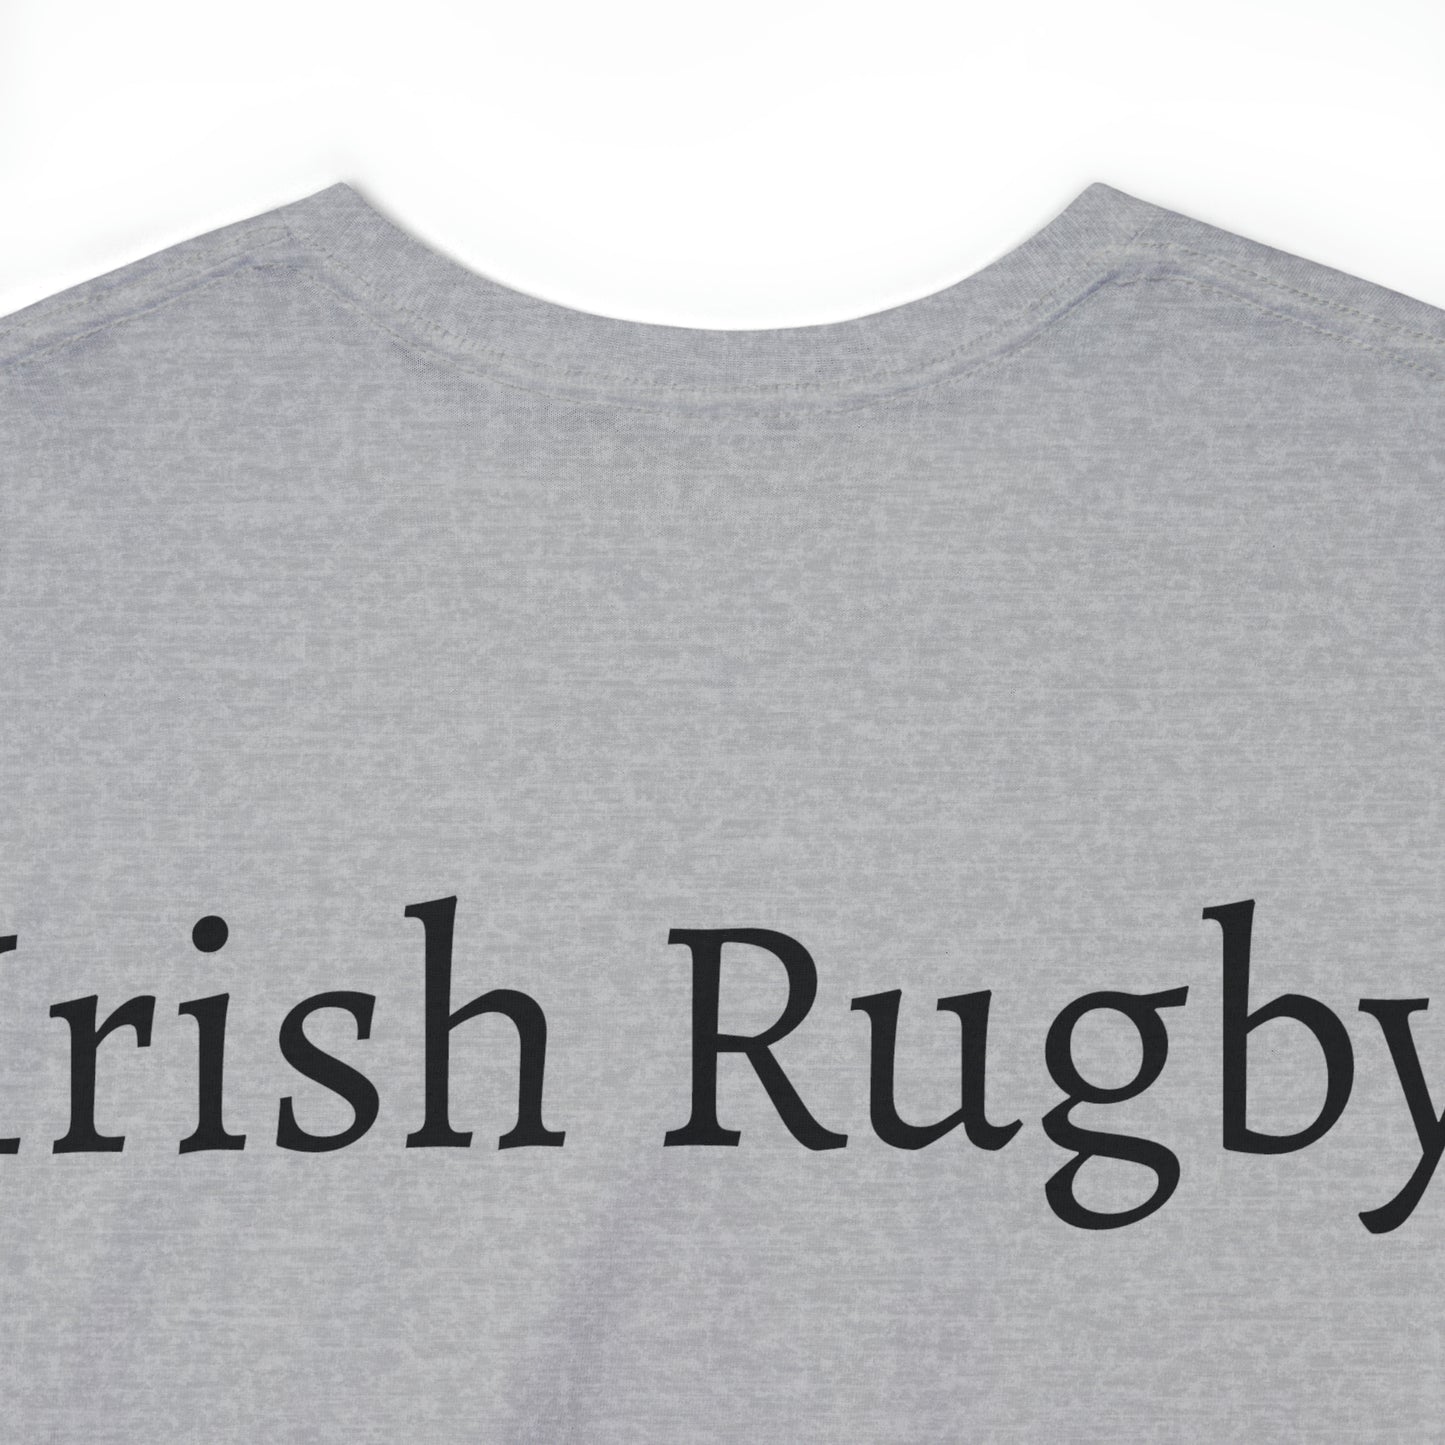 Conor Rugby - light shirts